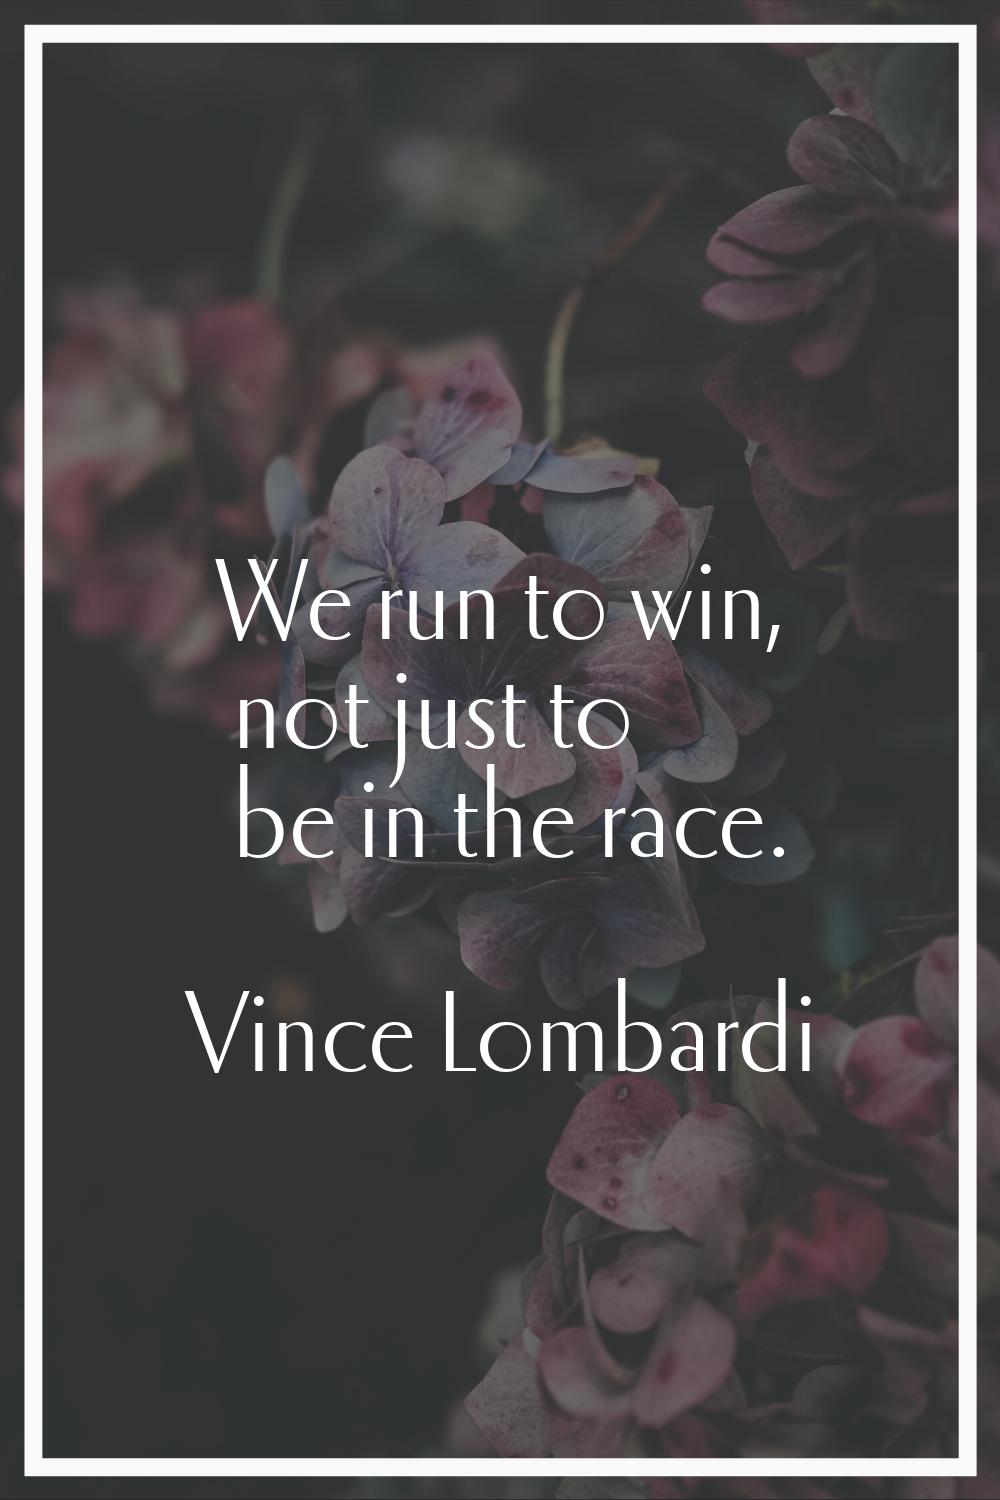 We run to win, not just to be in the race.